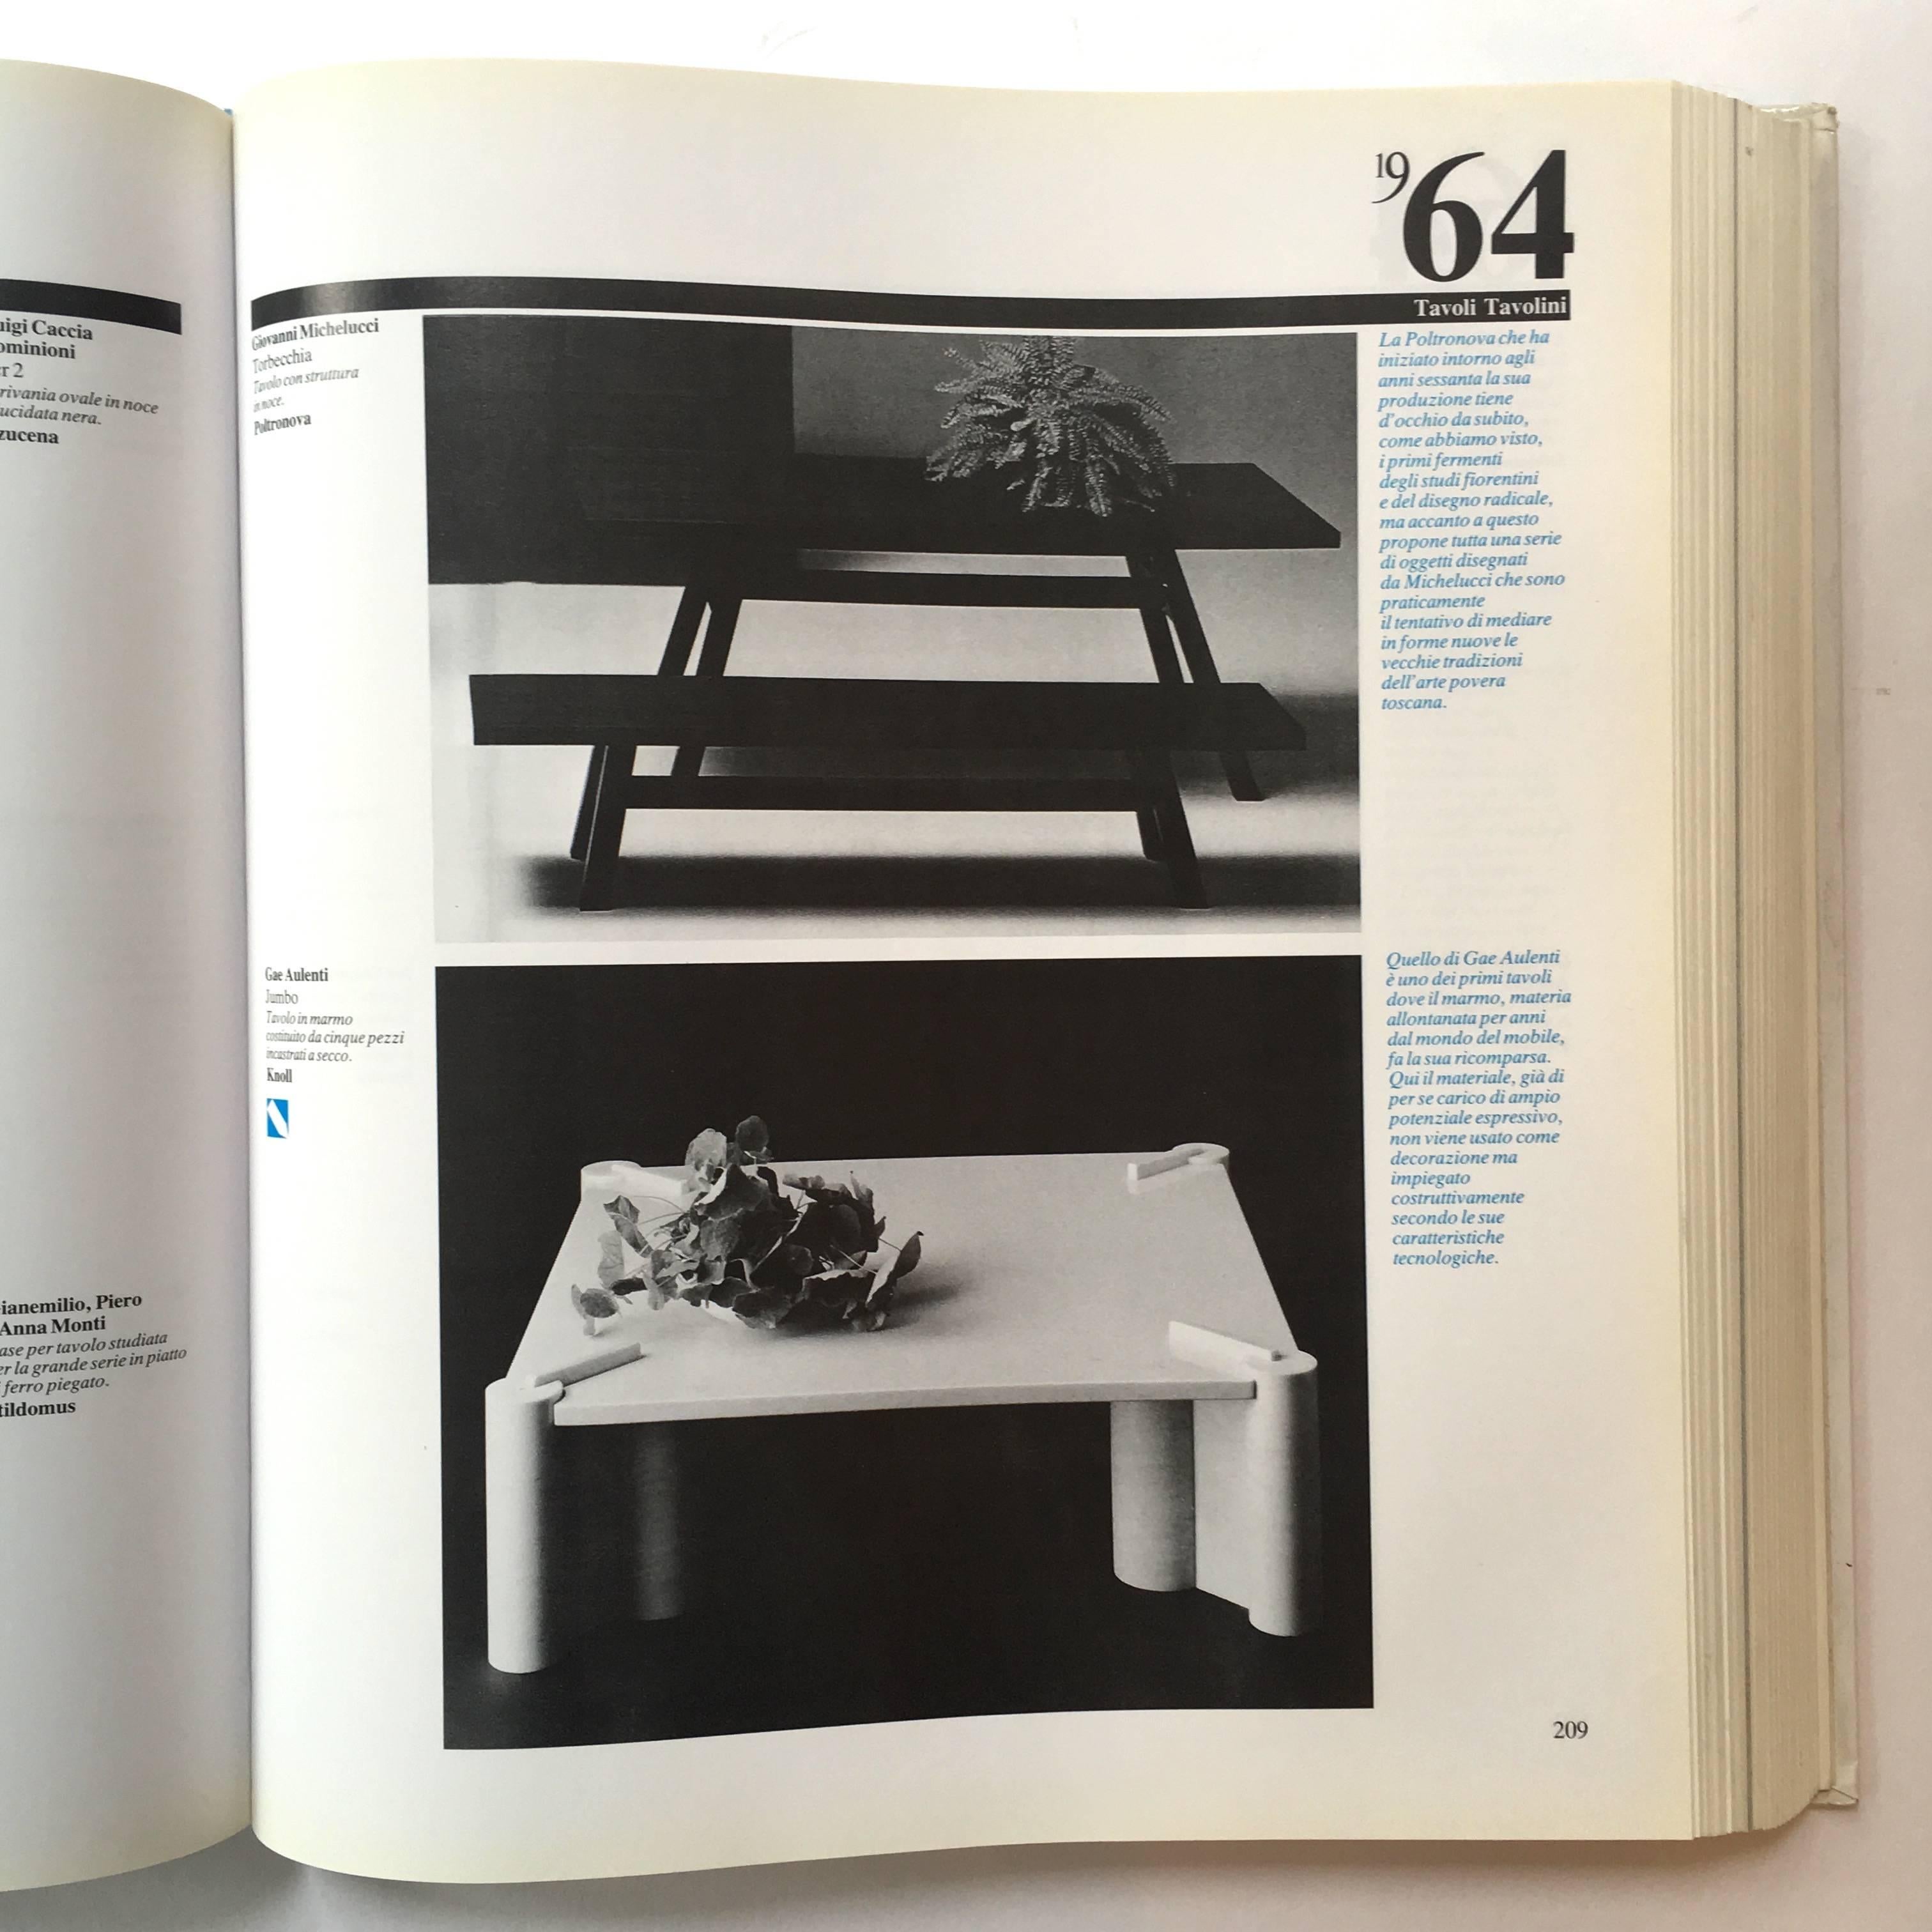 Second edition, published by Mondadori, Milan, 2001.

Originally published in 1985, this incredible book documents the ground breaking 30 years in Italian design between 1950 and 1980. Organized year by year, and printed in black and white,